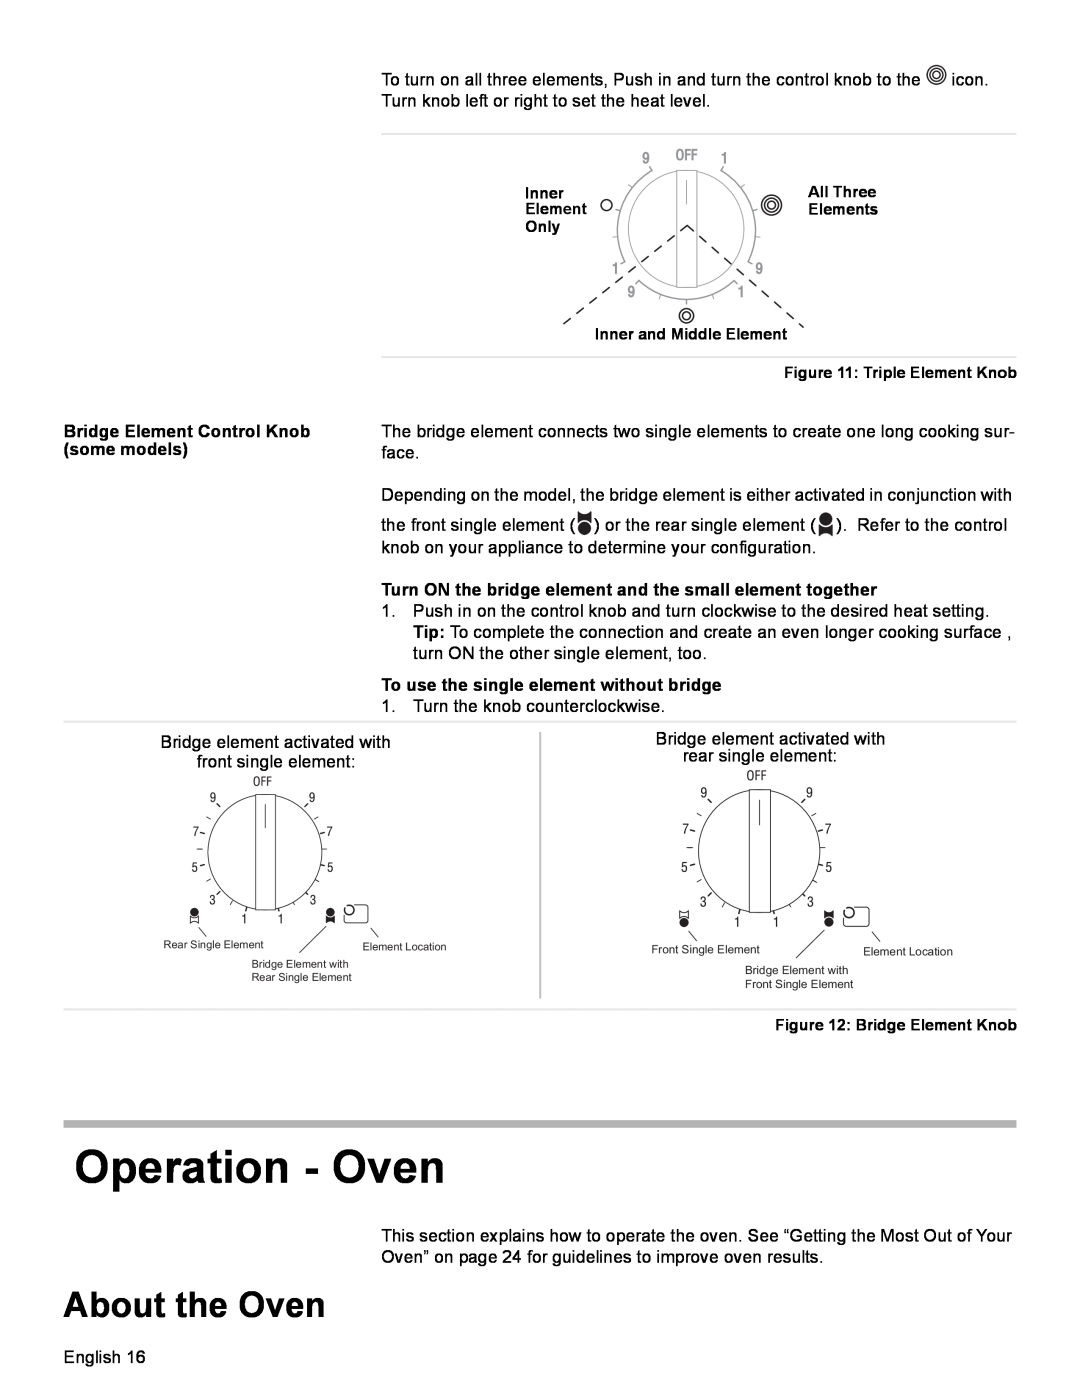 Bosch Appliances HES7282U manual Operation - Oven, About the Oven, Bridge Element Control Knob some models 